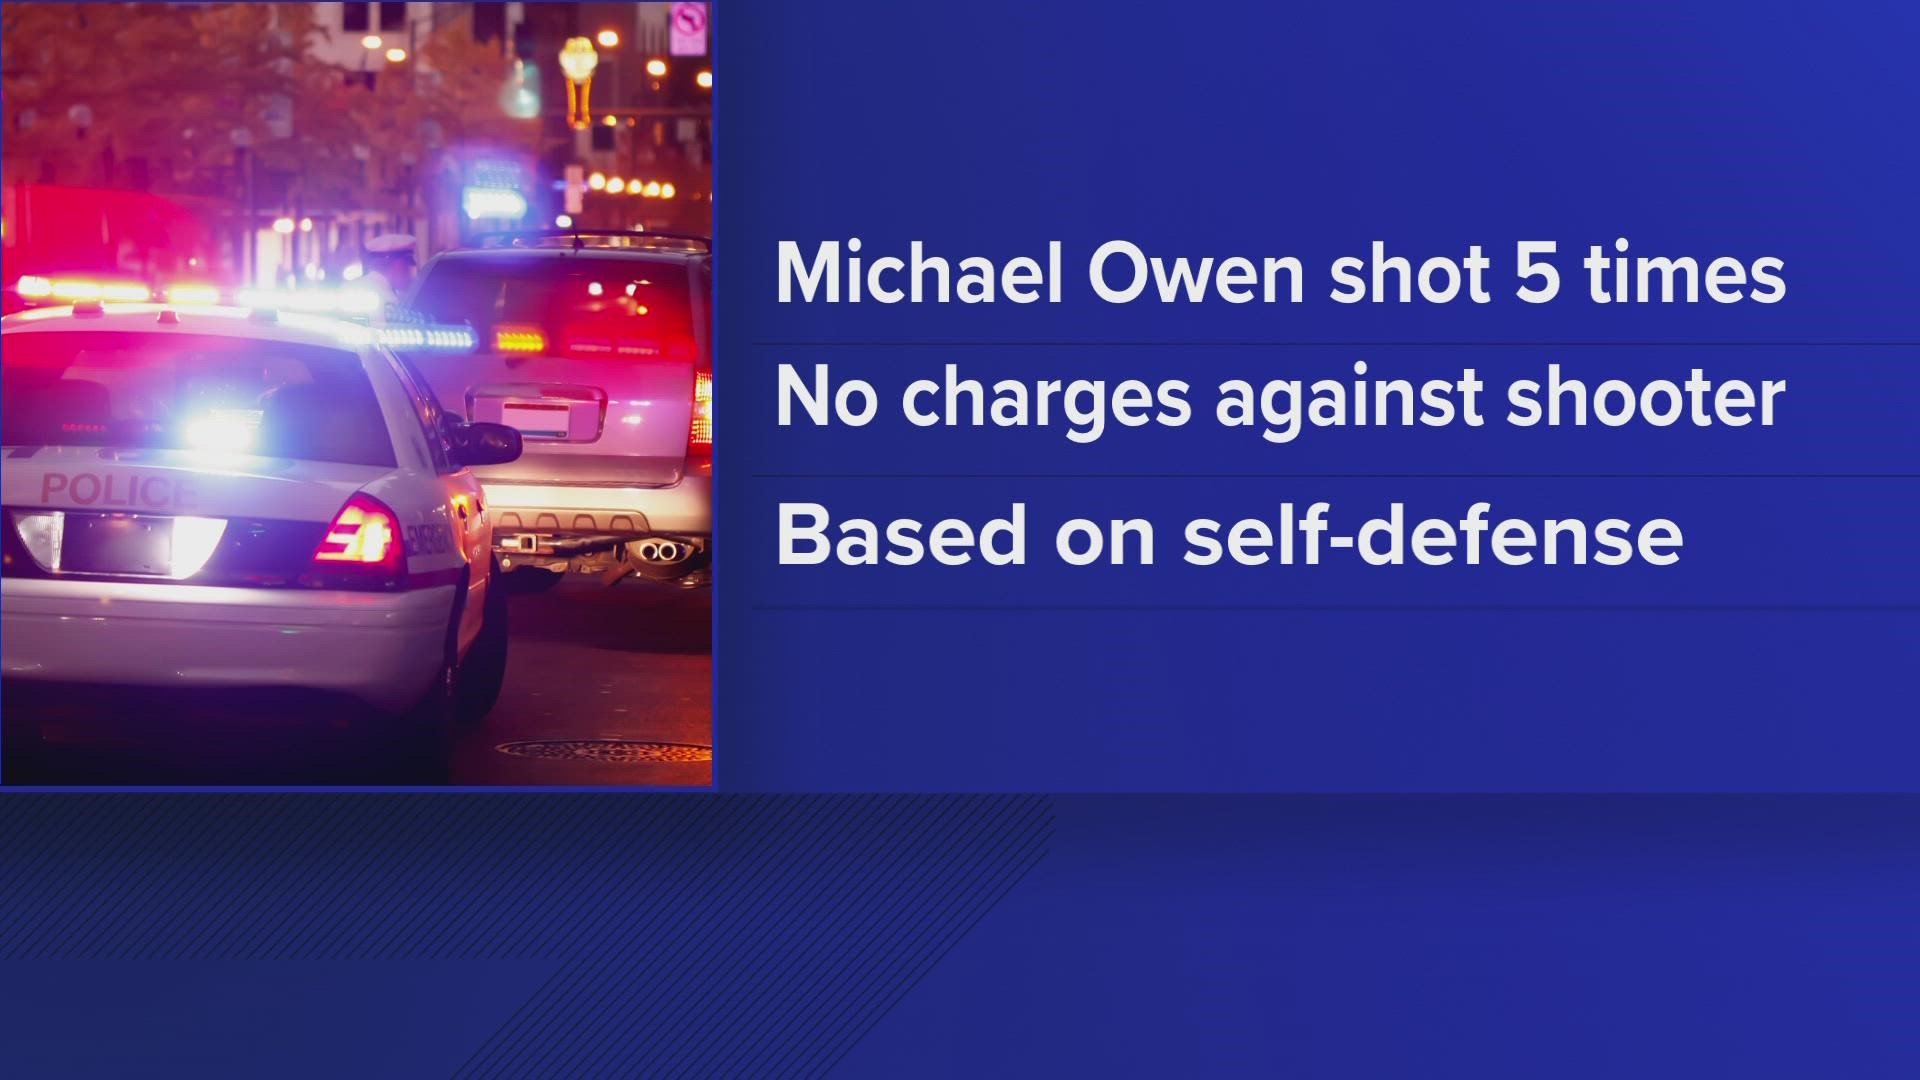 In May 2022, Michael Owen was shot by a homeowner as the District Attorney said he was trying to break in through the front door.